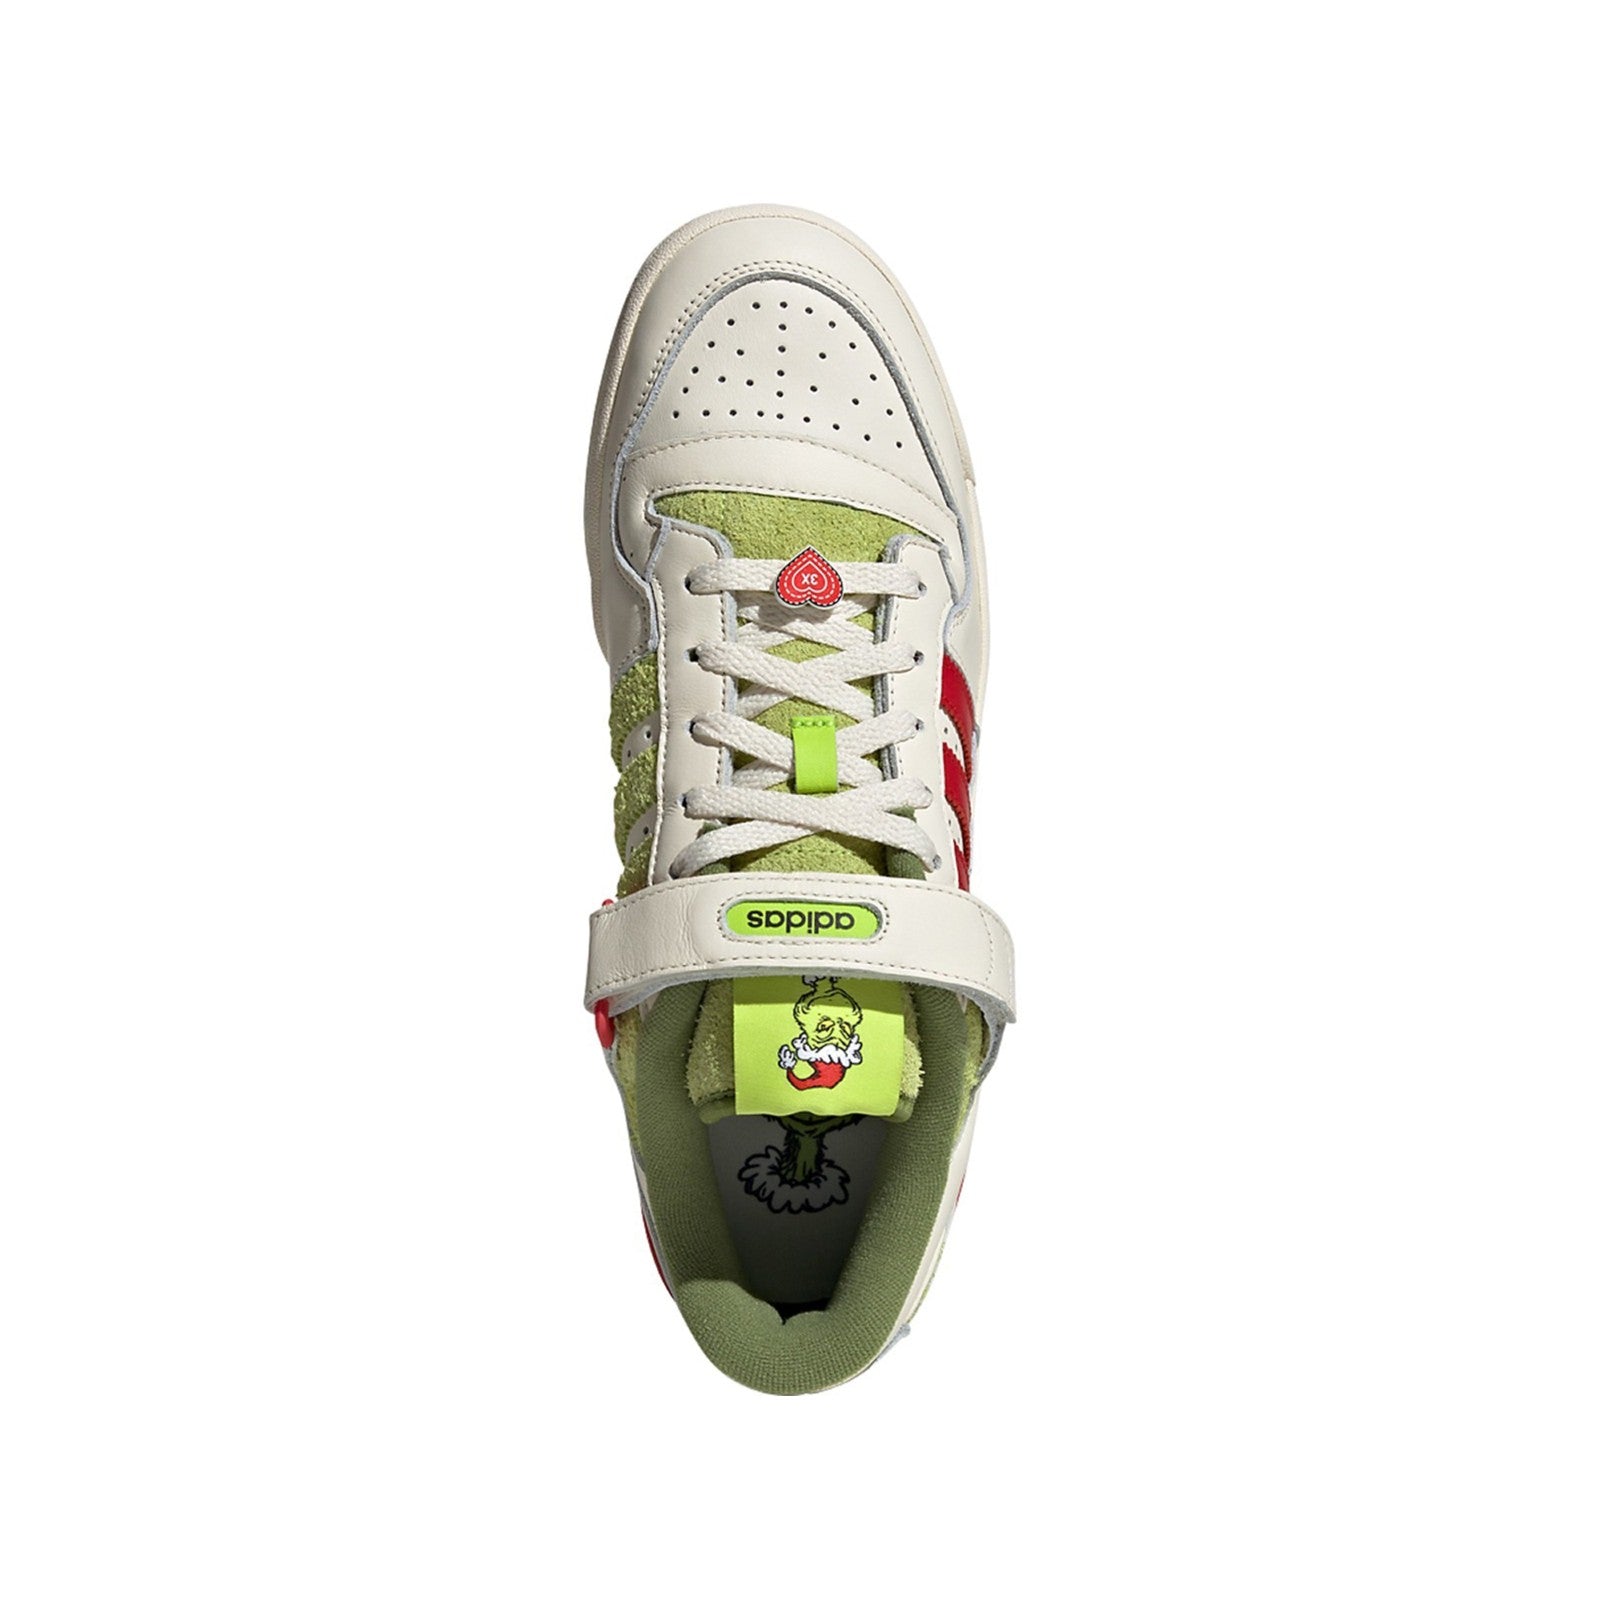 Adidas Originals Forum Low "The Grinch" (CWHITE/COLRED/SSLIME) Kids Shoes ID9175 Kids's ID9175